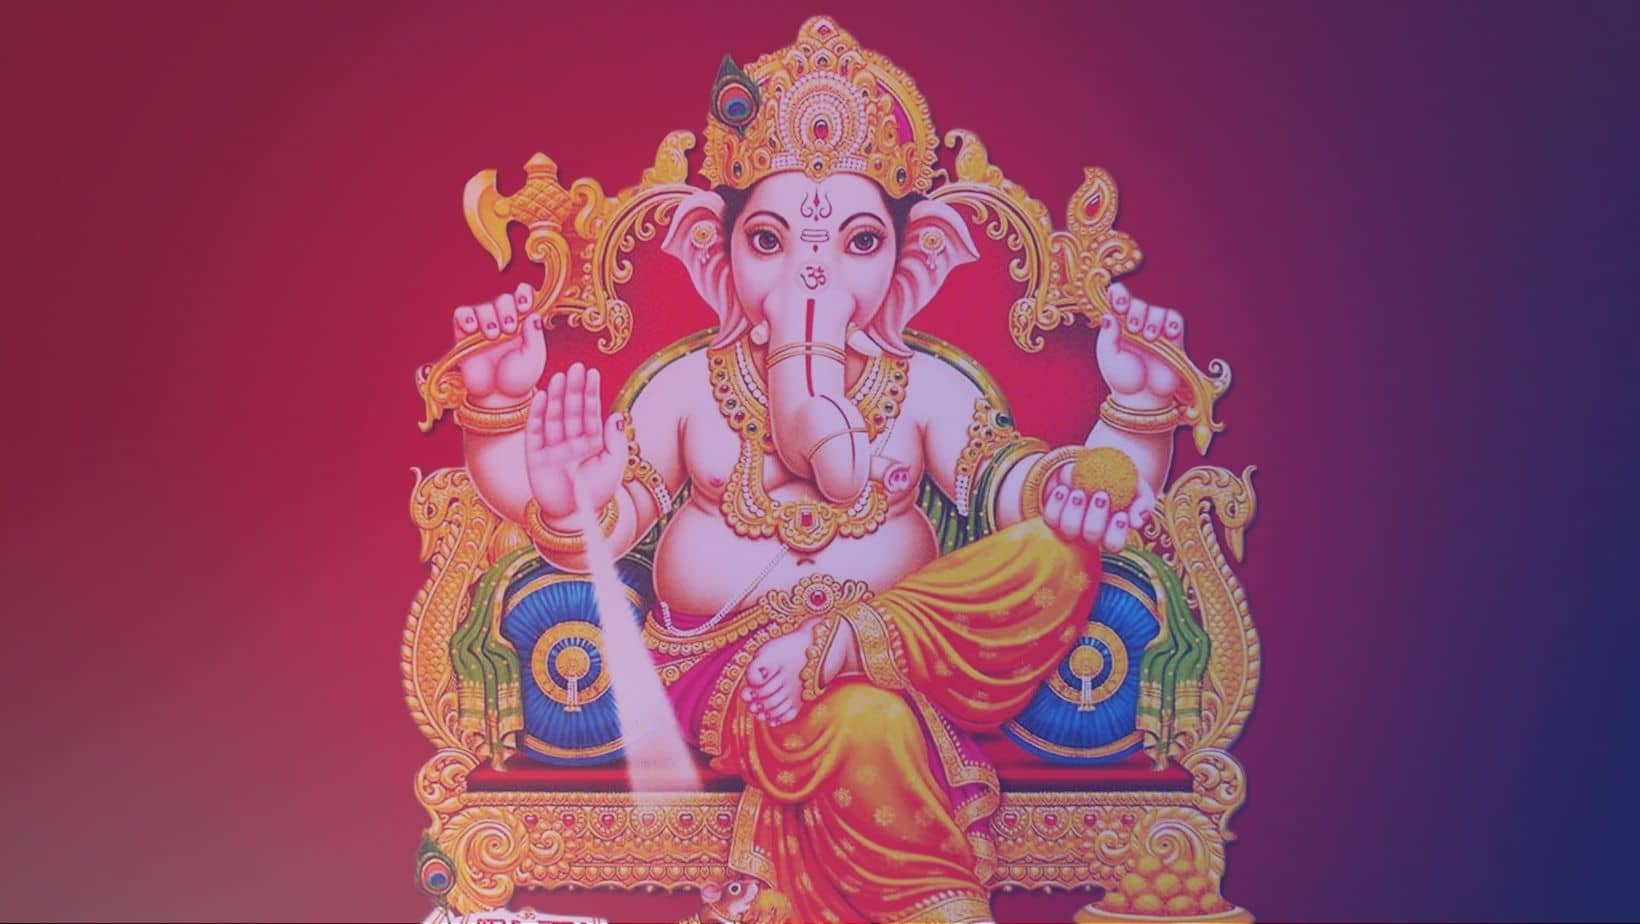 50+ Amazing Lord Ganesha Images Collection